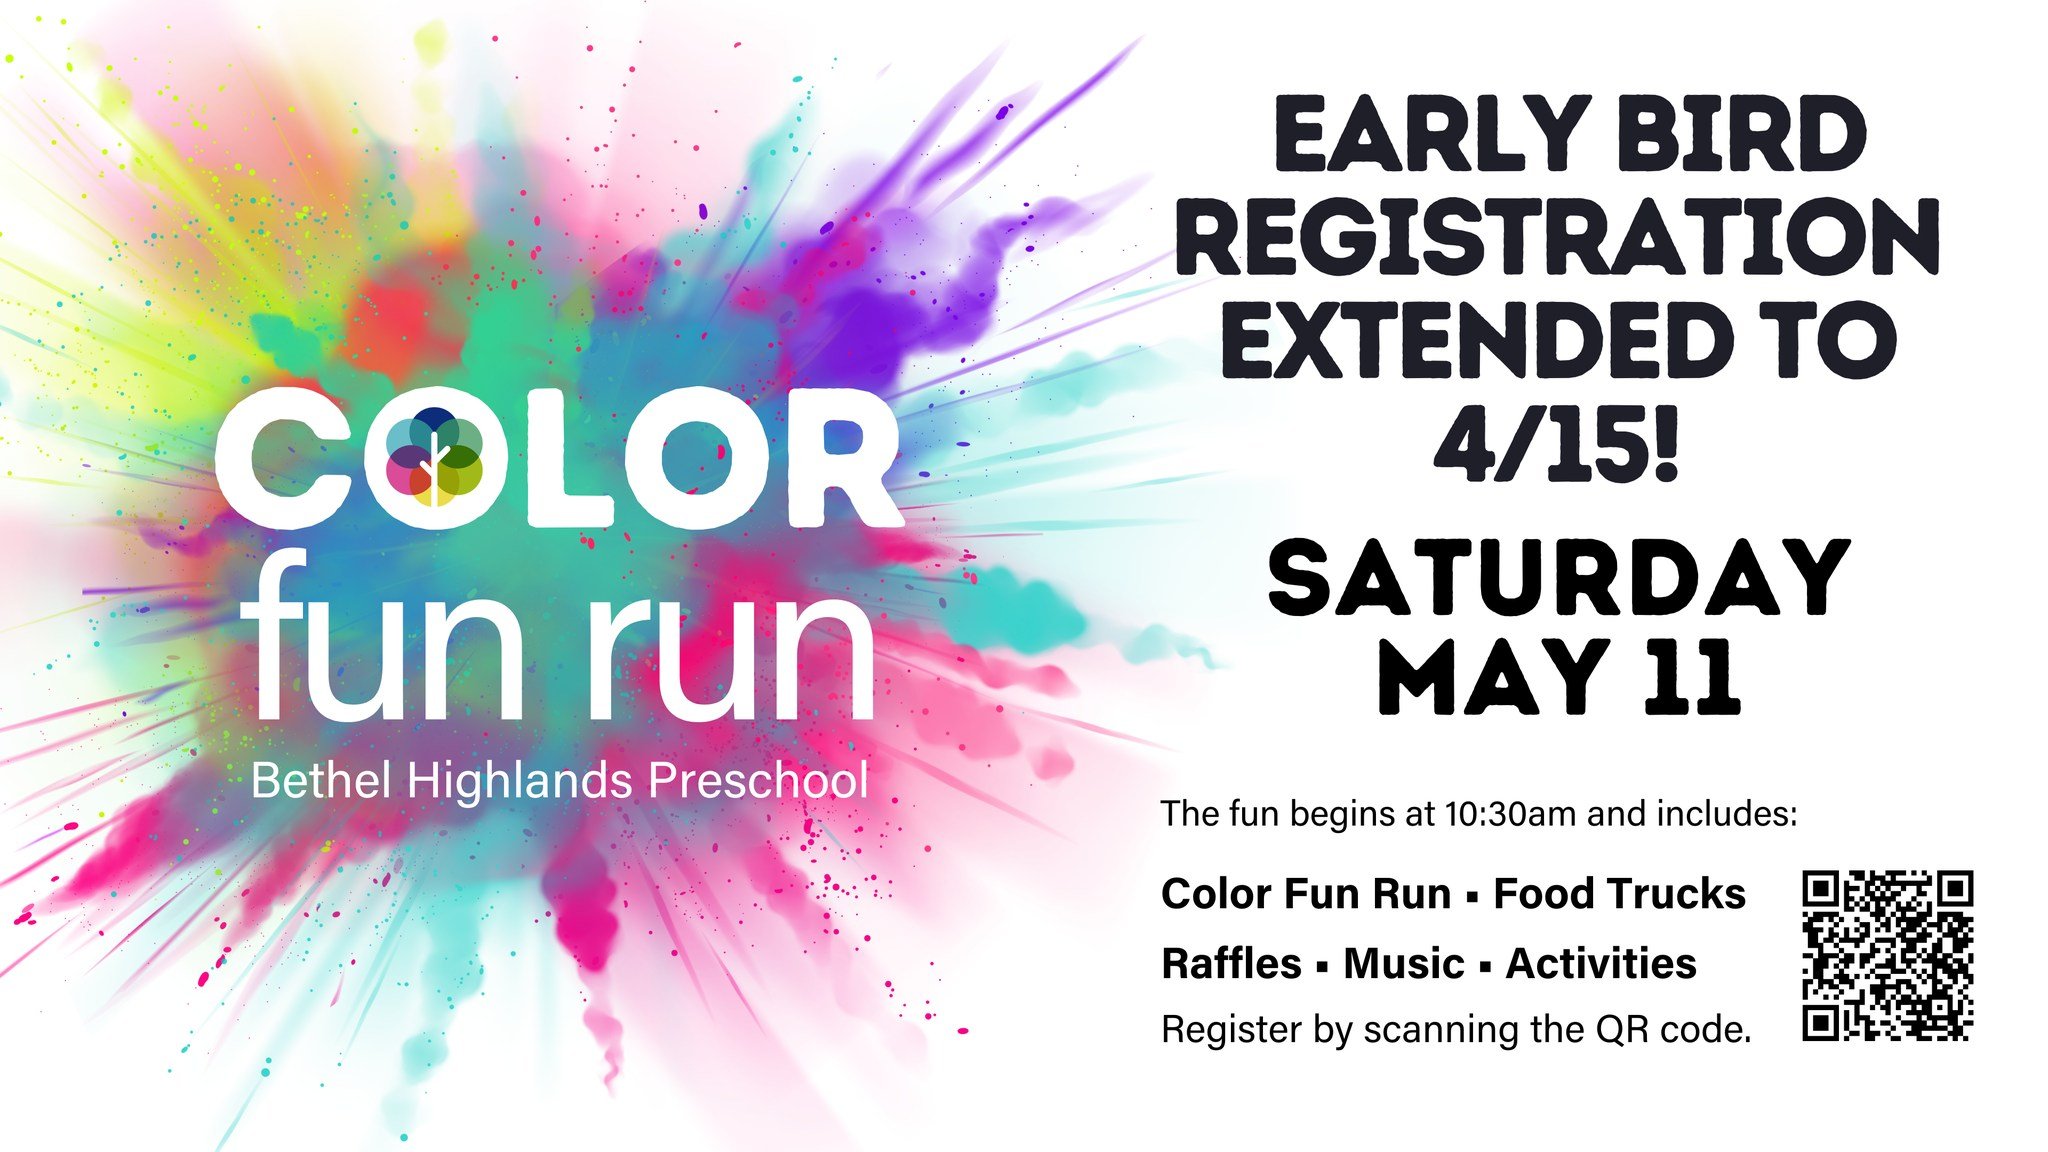 We are so excited to announce our Color Fun Run early bird deadline has been extended to Monday, April 15th. 

Go to https://www.bhphudson.org/color-fun-run-registration to get in on the early bird discount ending this Monday, April 15th. 
Your Ticke